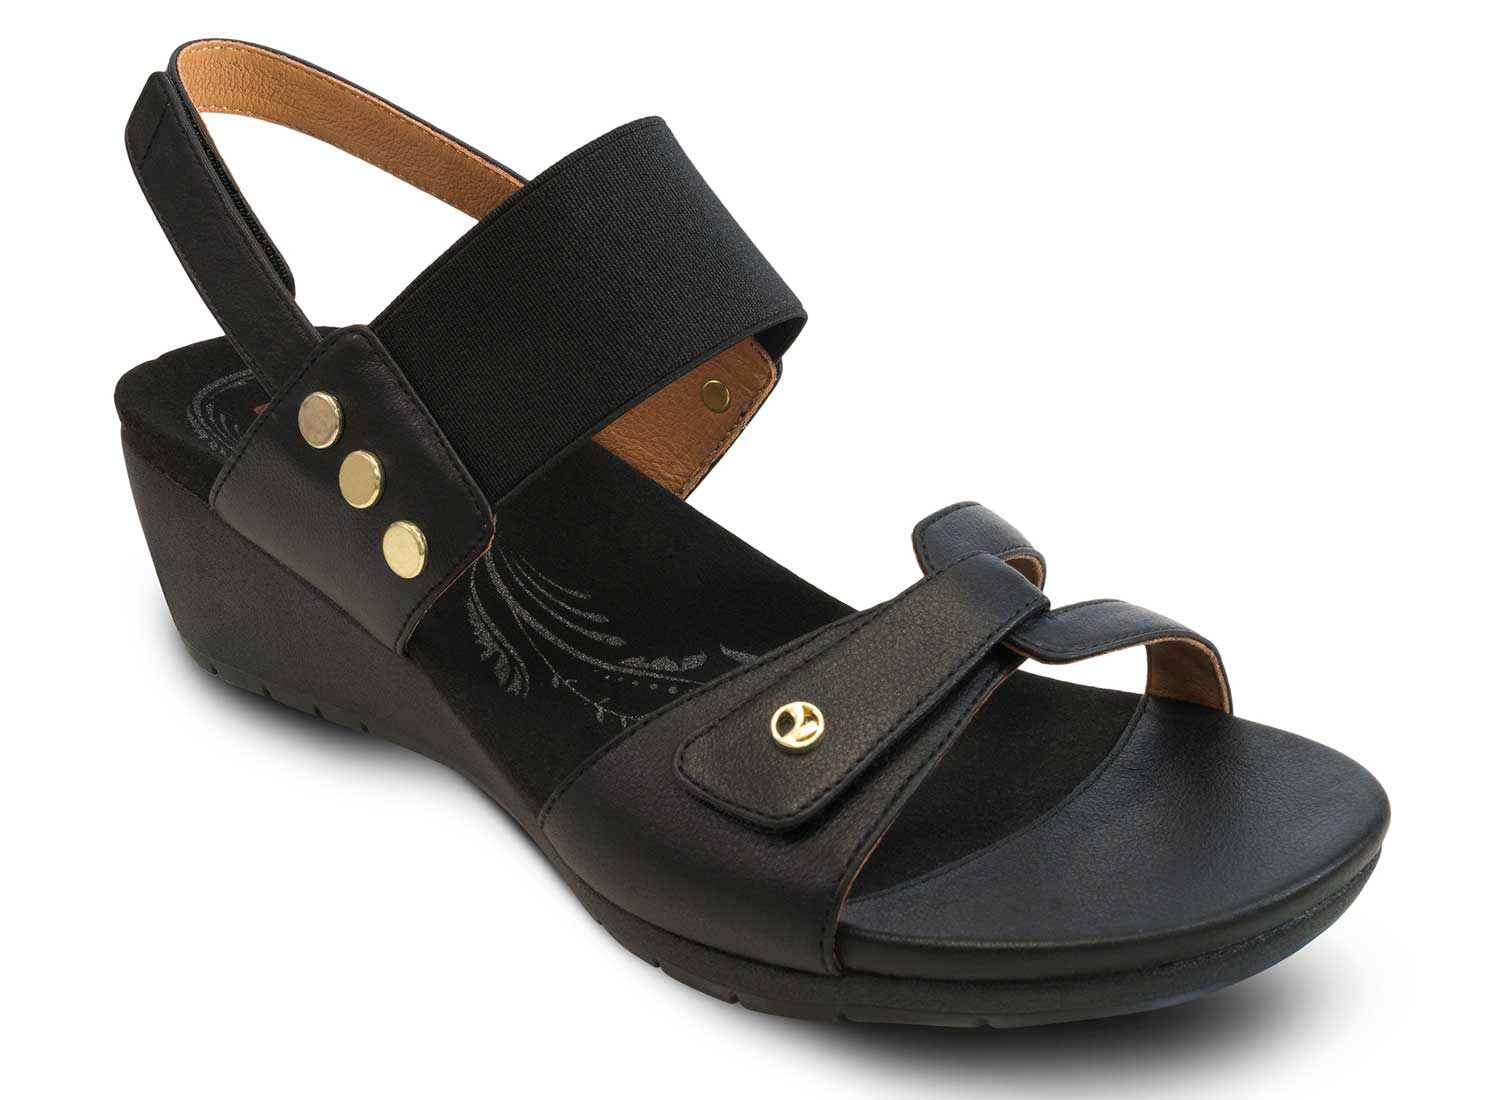 Revere Tahiti - Women's Sandal - Medium - Extra Depth With Removable Foot Beds